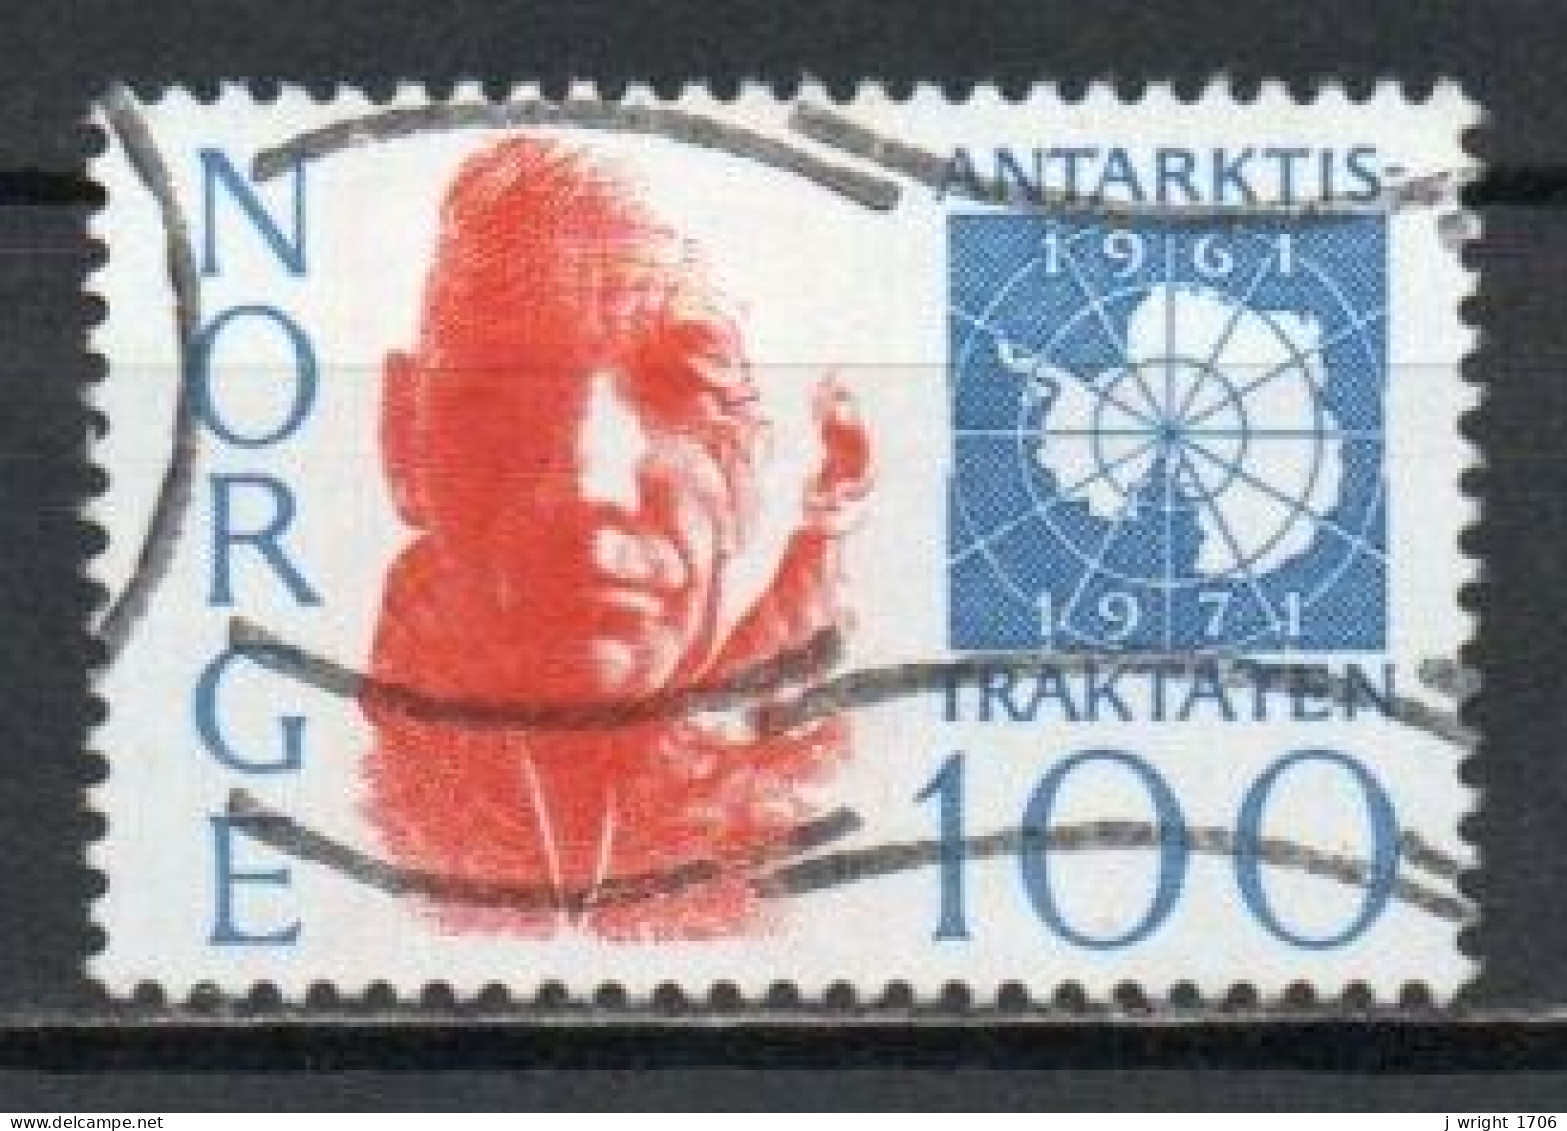 Norway, 1971, Antartic Treaty 10th Anniv, 100ö, USED - Used Stamps